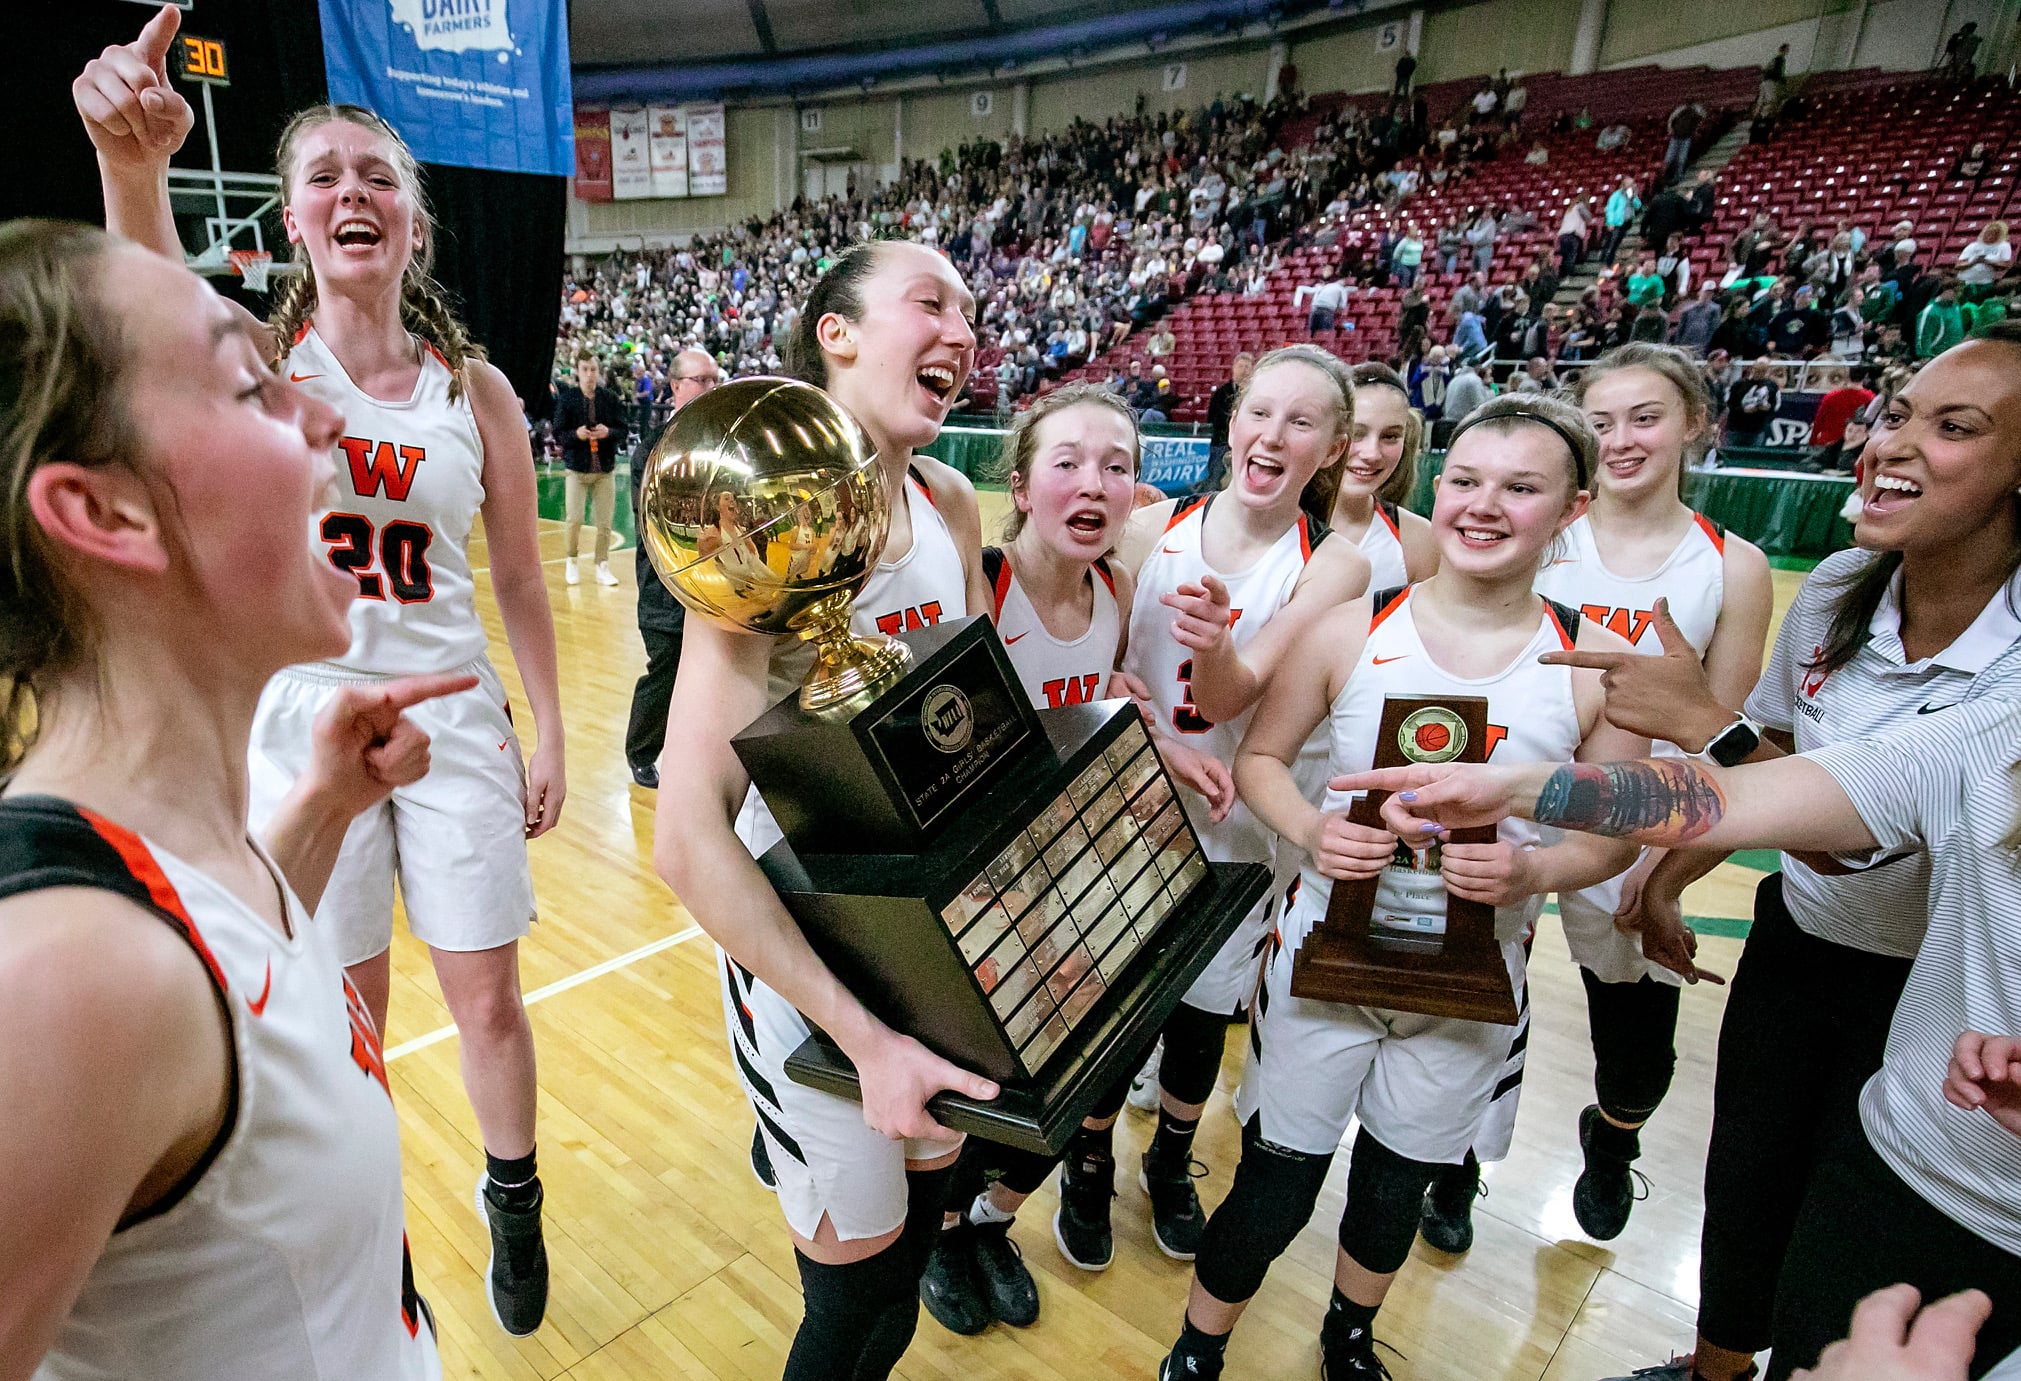 Washougal celebrates after winning the WIAA 2A girls state basketball championship over East Valley (Spokane), on Saturday, Mar. 2, 2019, at the Yakima Valley SunDome. Washougal Panthers defeated against the East Valley (Spokane) Knights in overtime 49-40.